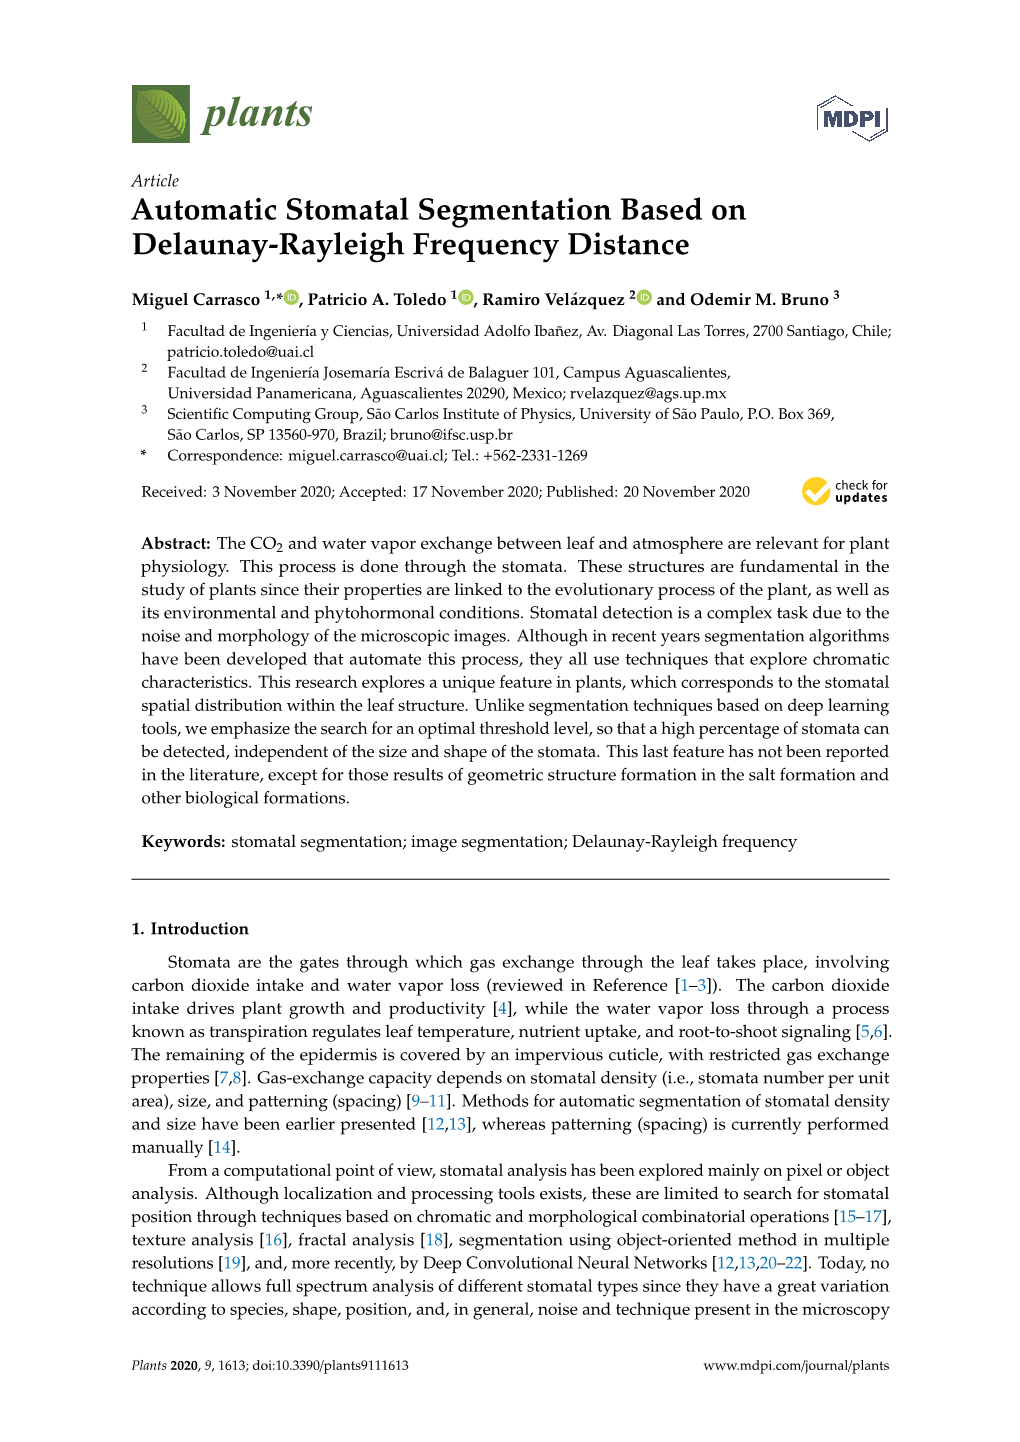 Automatic Stomatal Segmentation Based on Delaunay-Rayleigh Frequency Distance